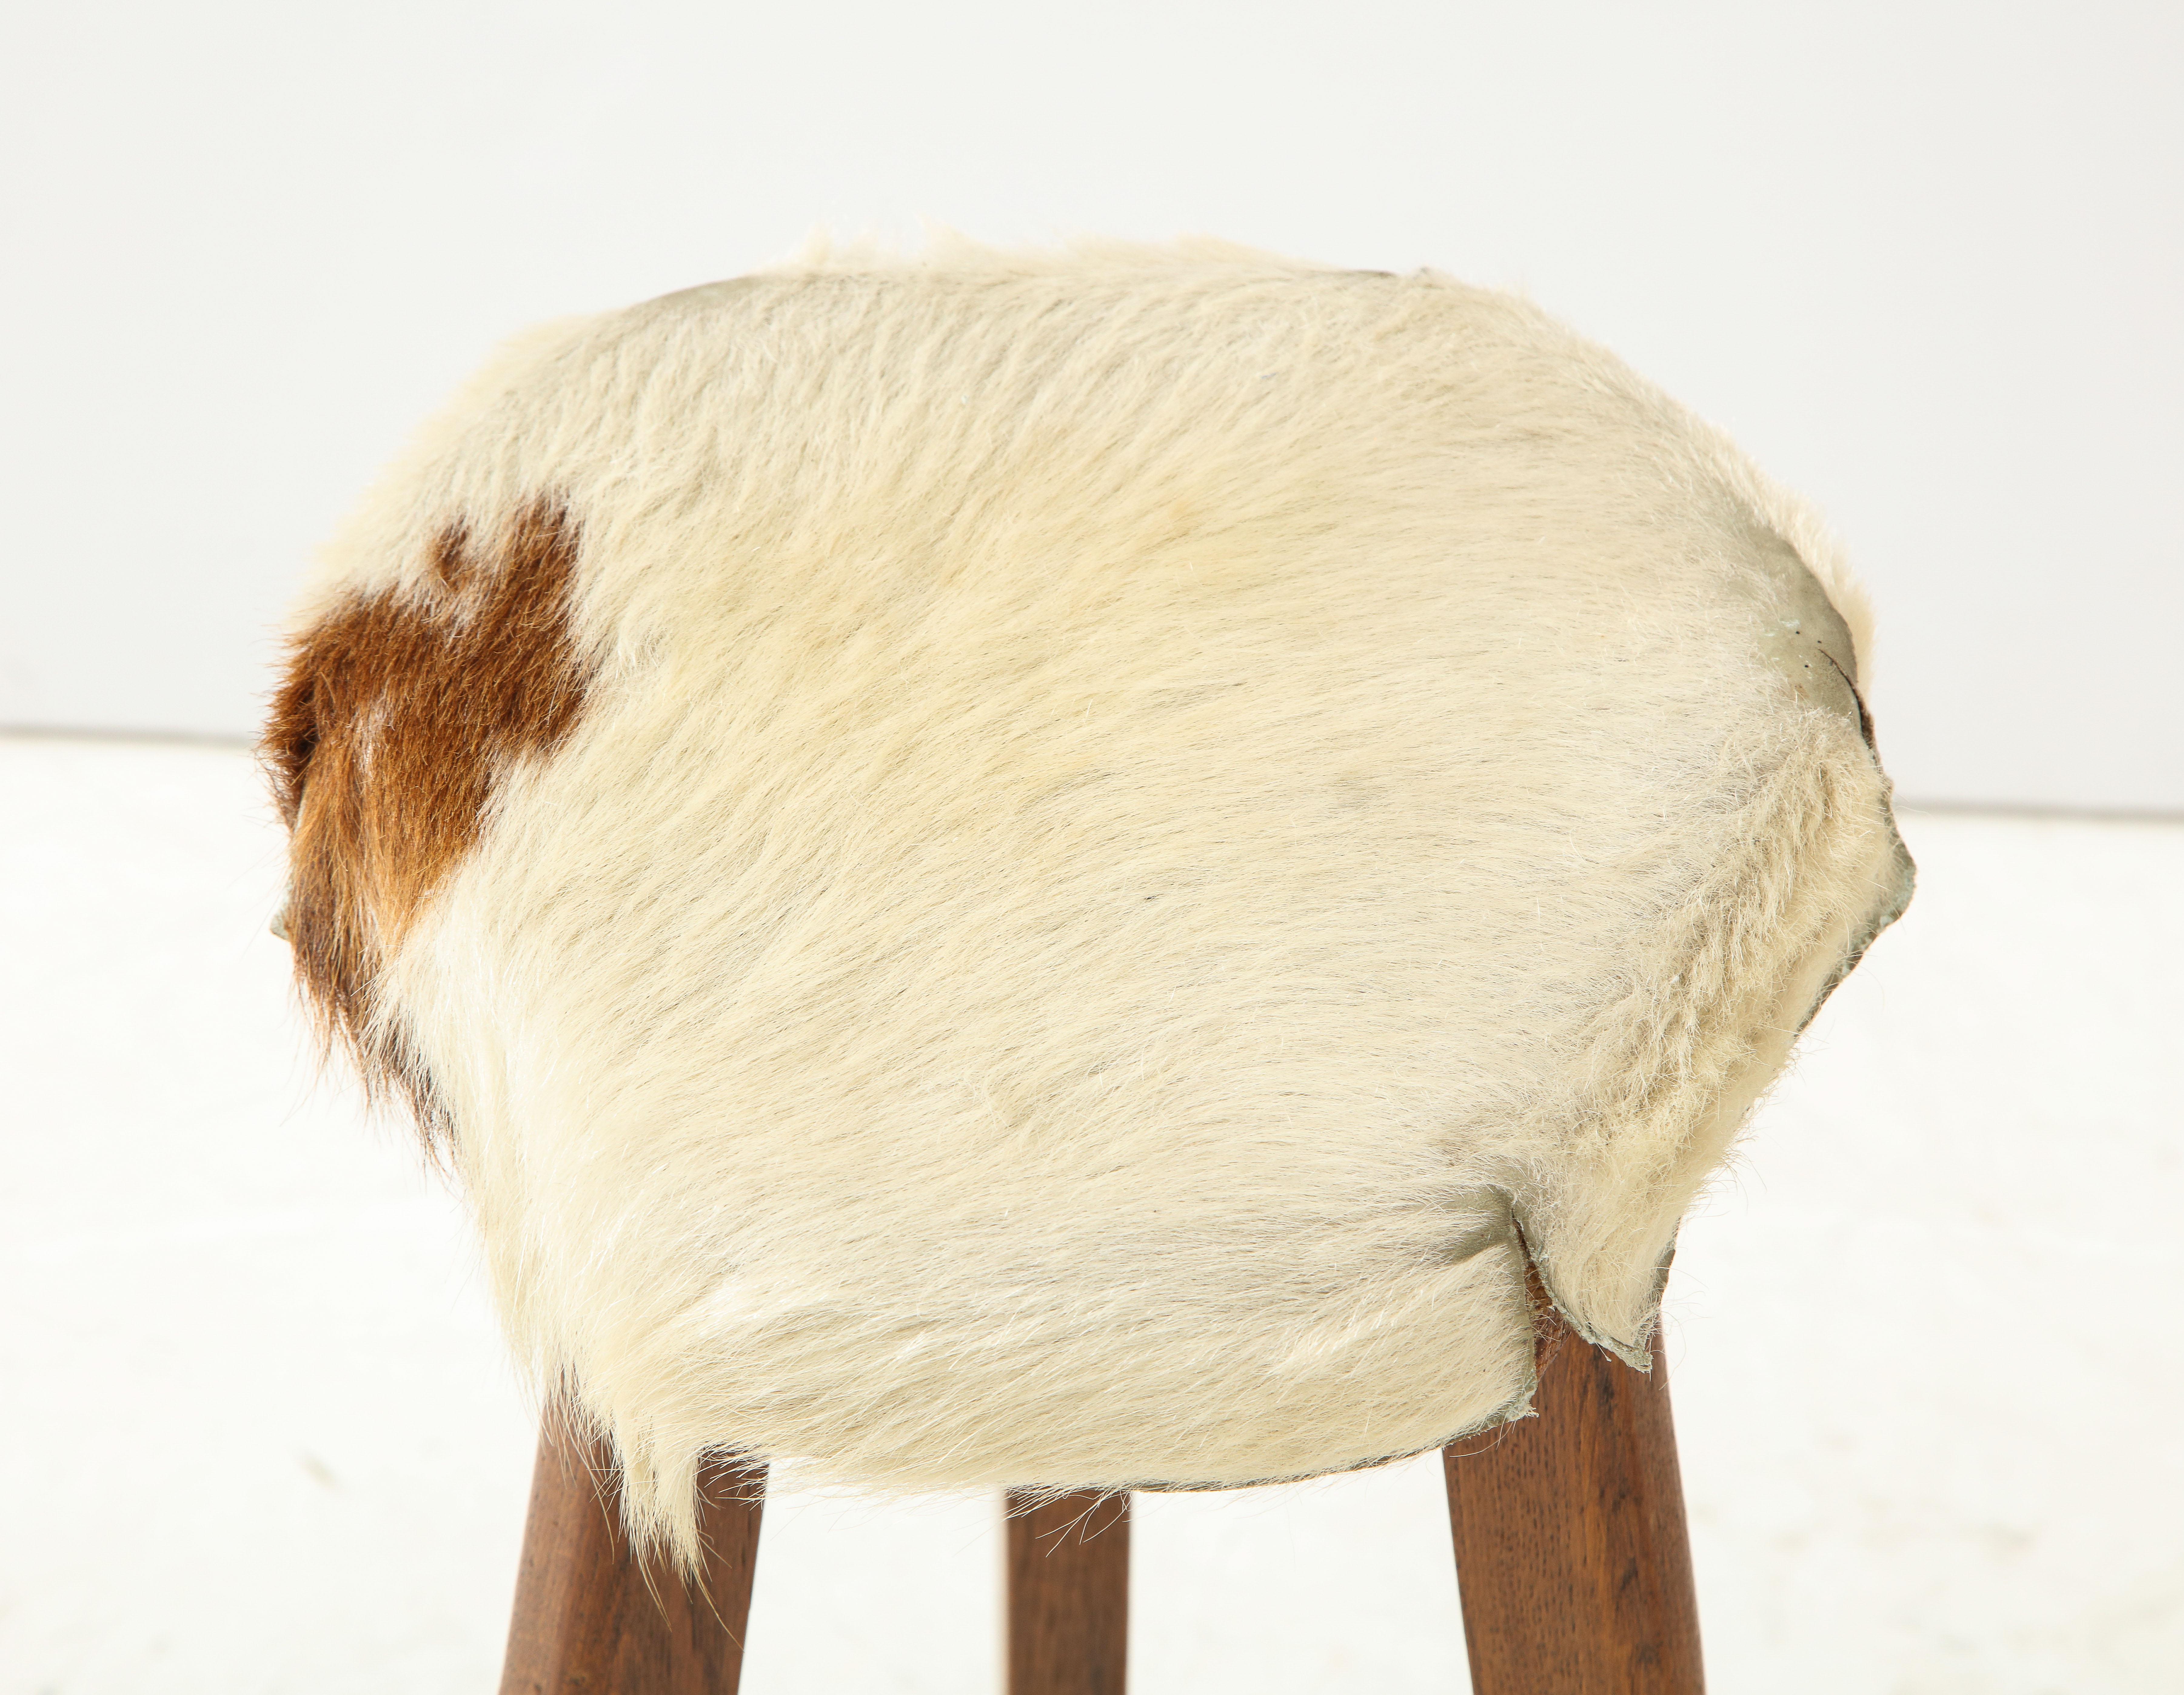 Pair of Midcentury Stools with Cowhide Seats, France, circa 1960 For Sale 6